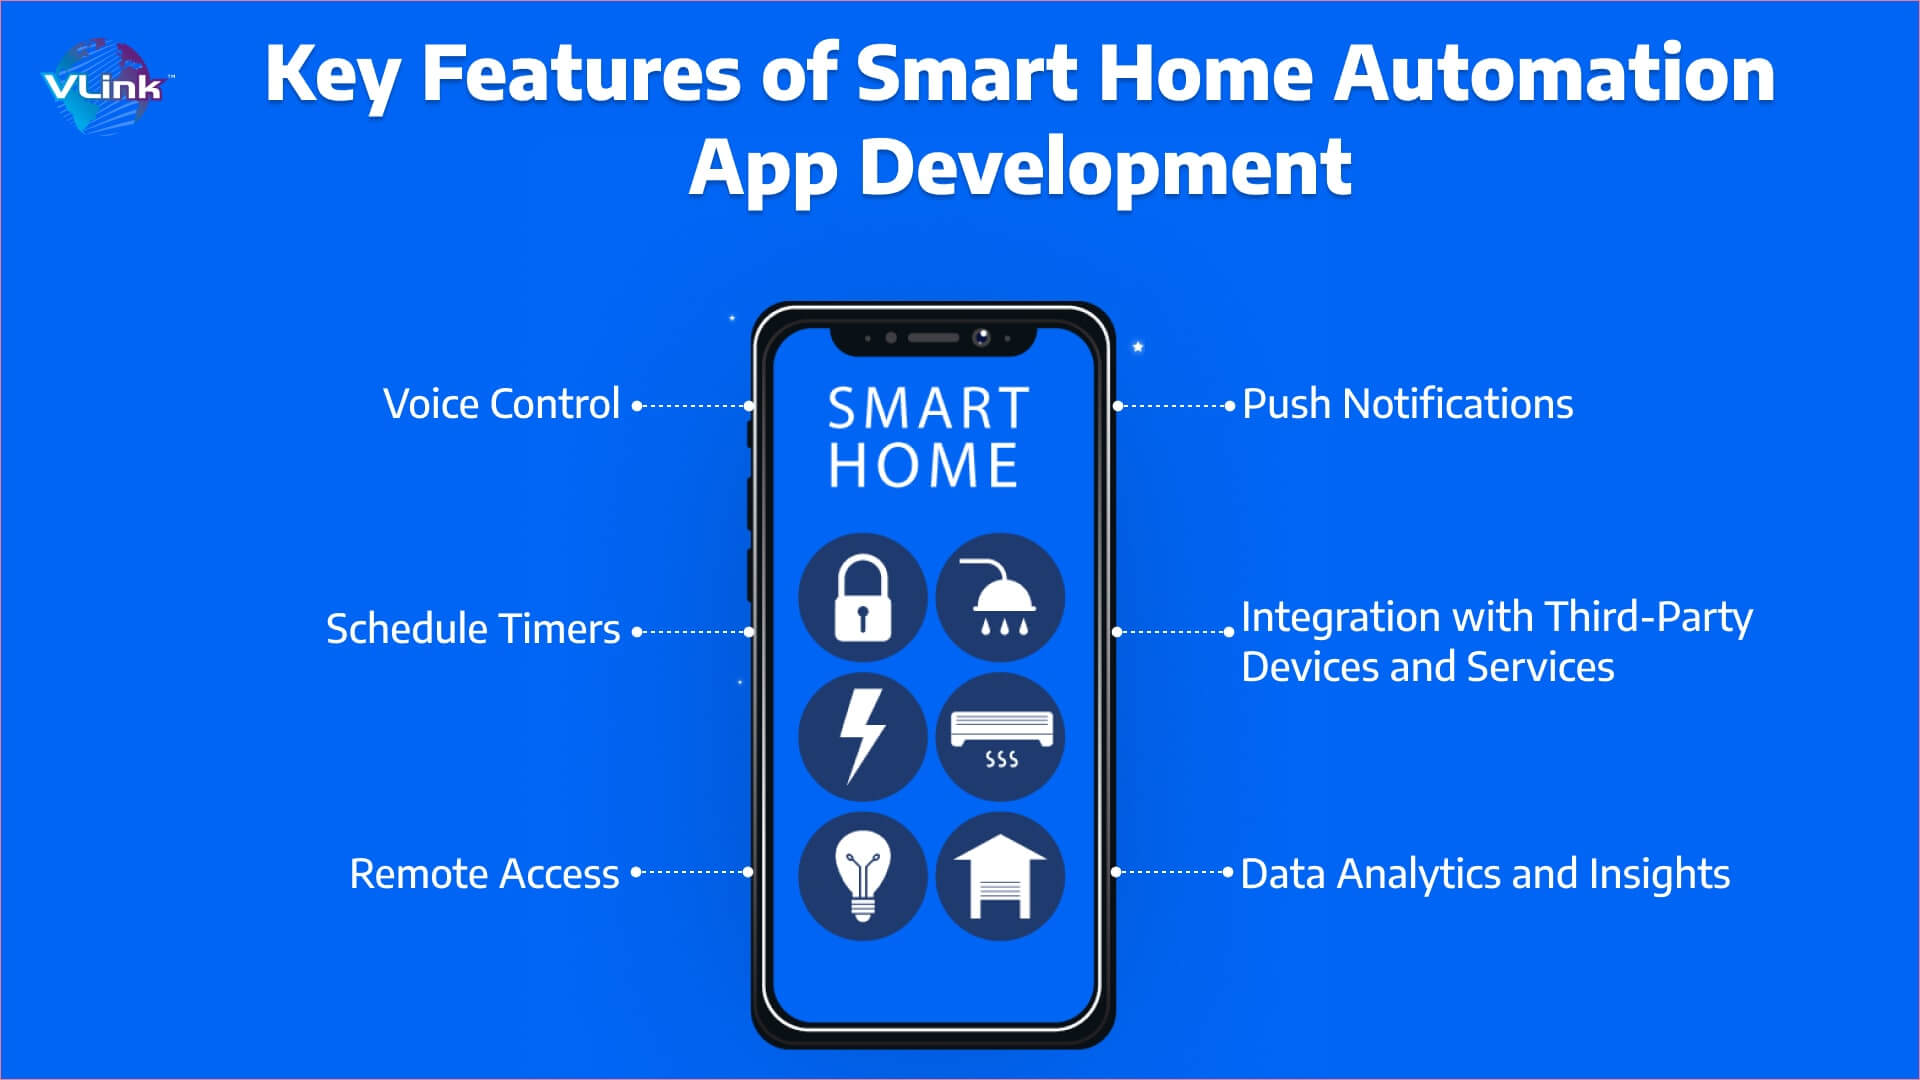 Key Features of Smart Home Automation App Development